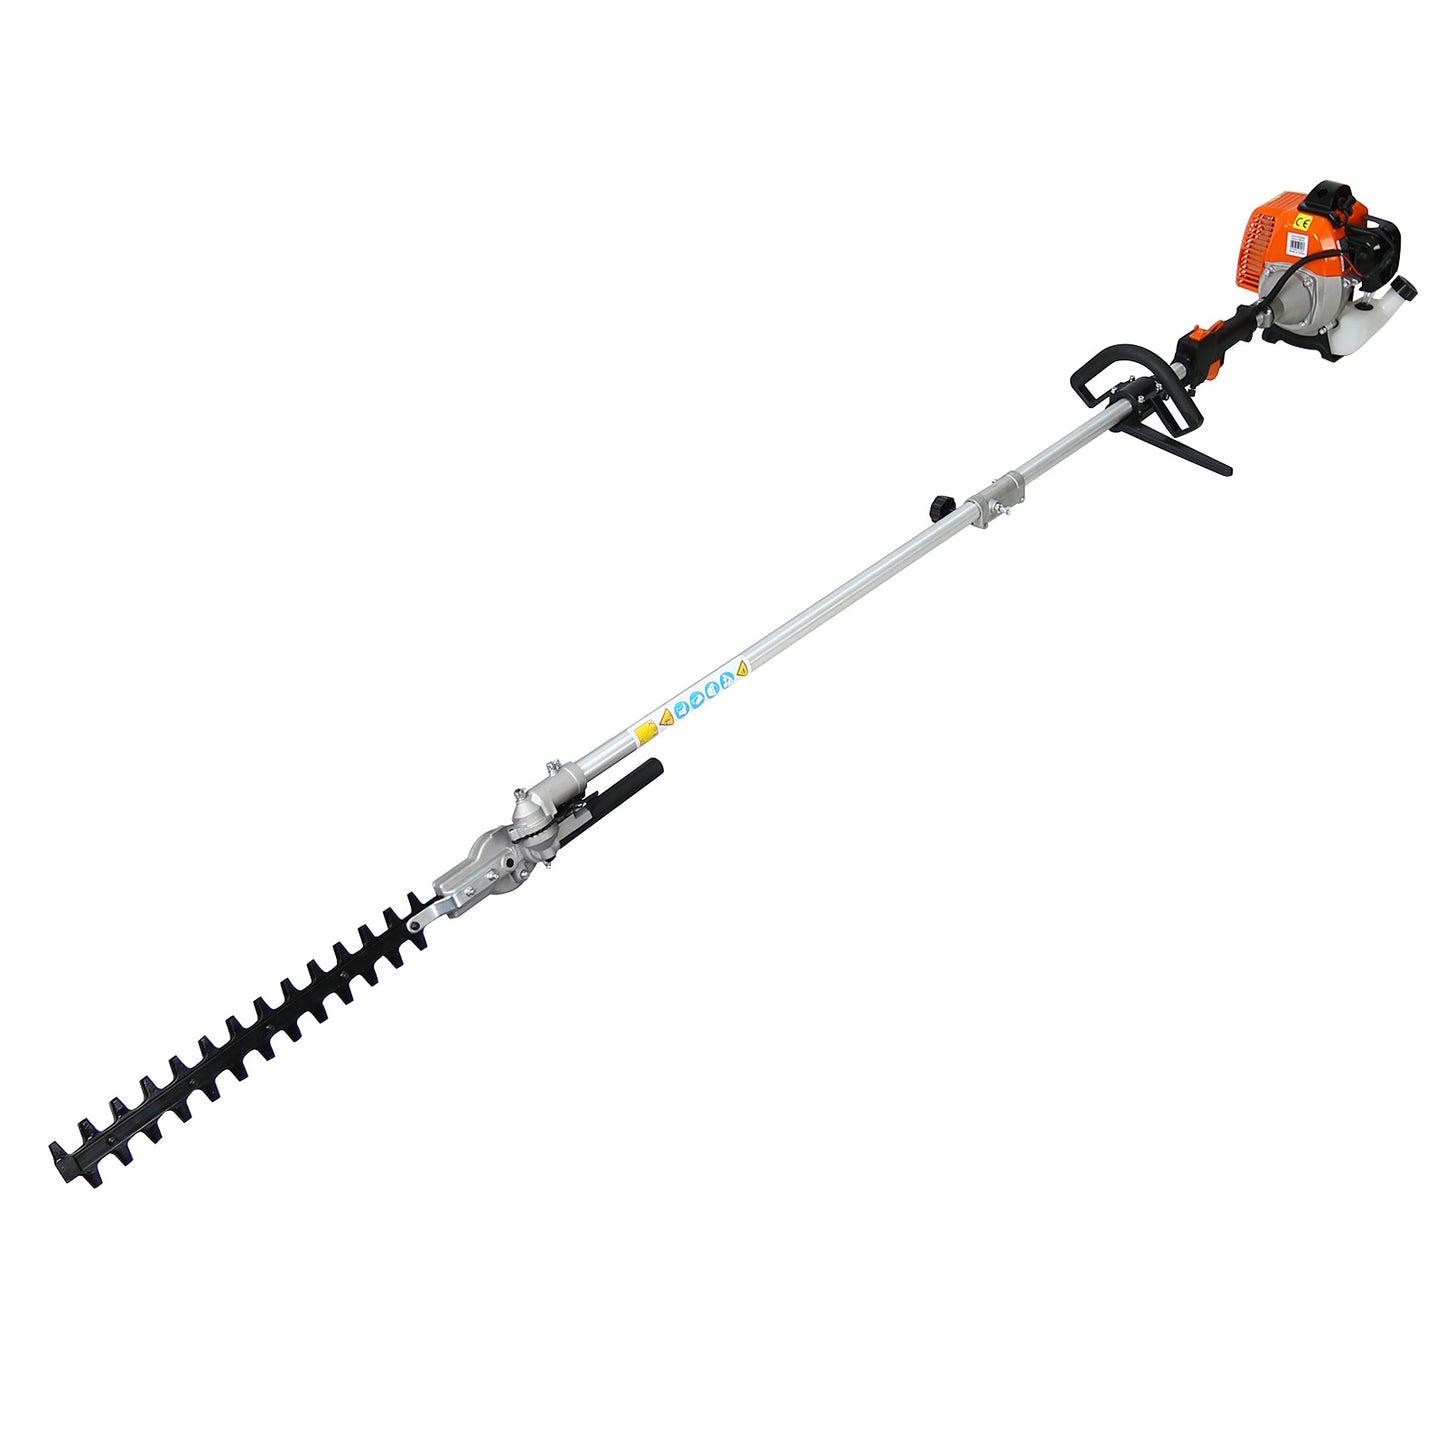 10 in 1 Multi-Functional Trimming Tool, 52CC 2-Cycle Garden Tool System with Gas Pole Saw, Hedge Trimmer, Grass Trimmer, and Brush Cutter EPA Compliant